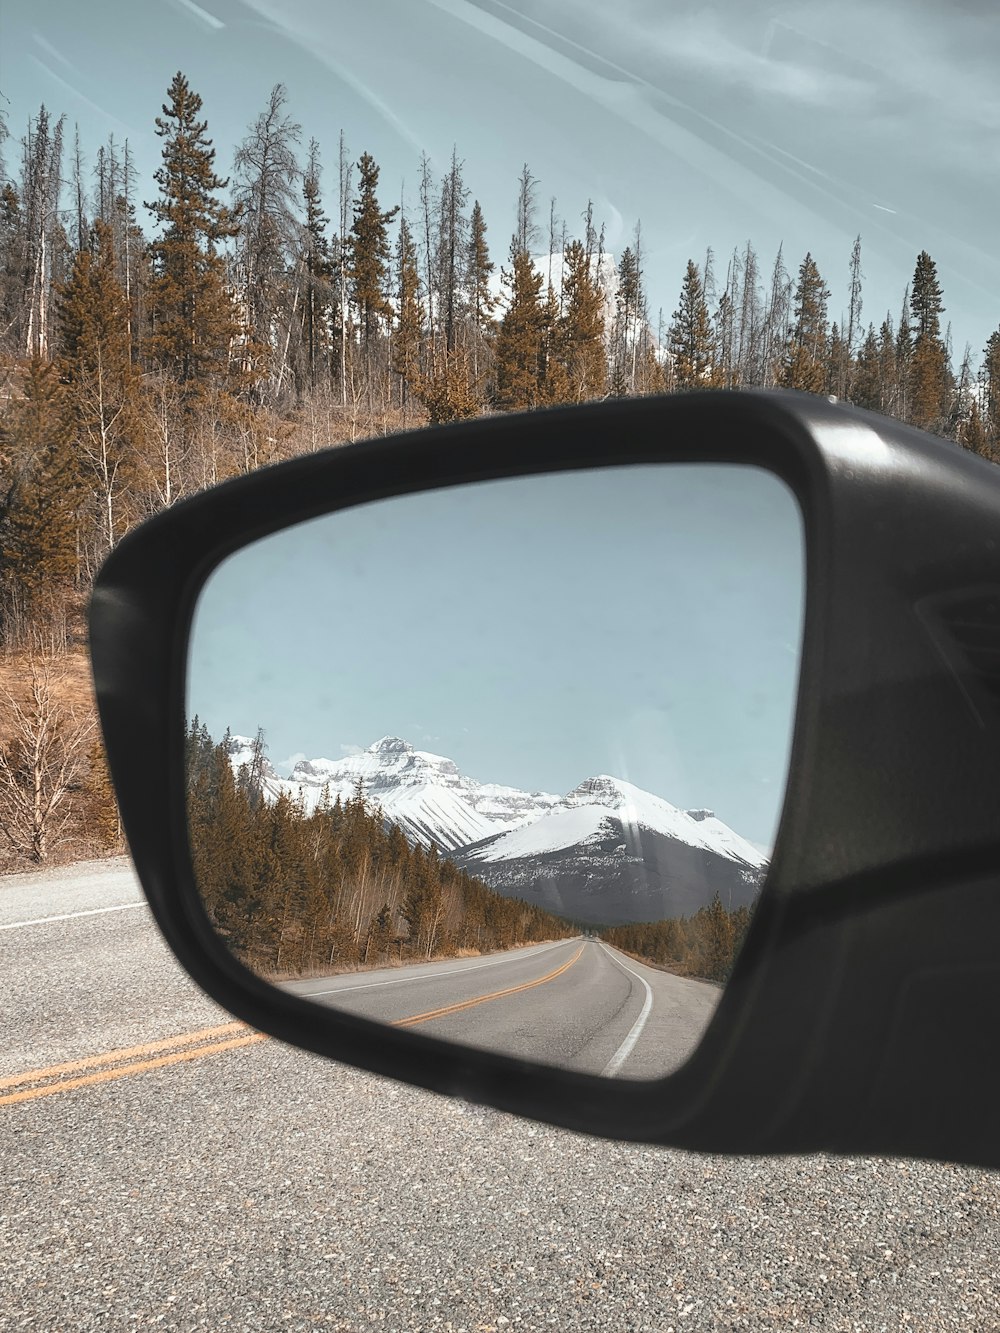 car side mirror showing snow covered mountain